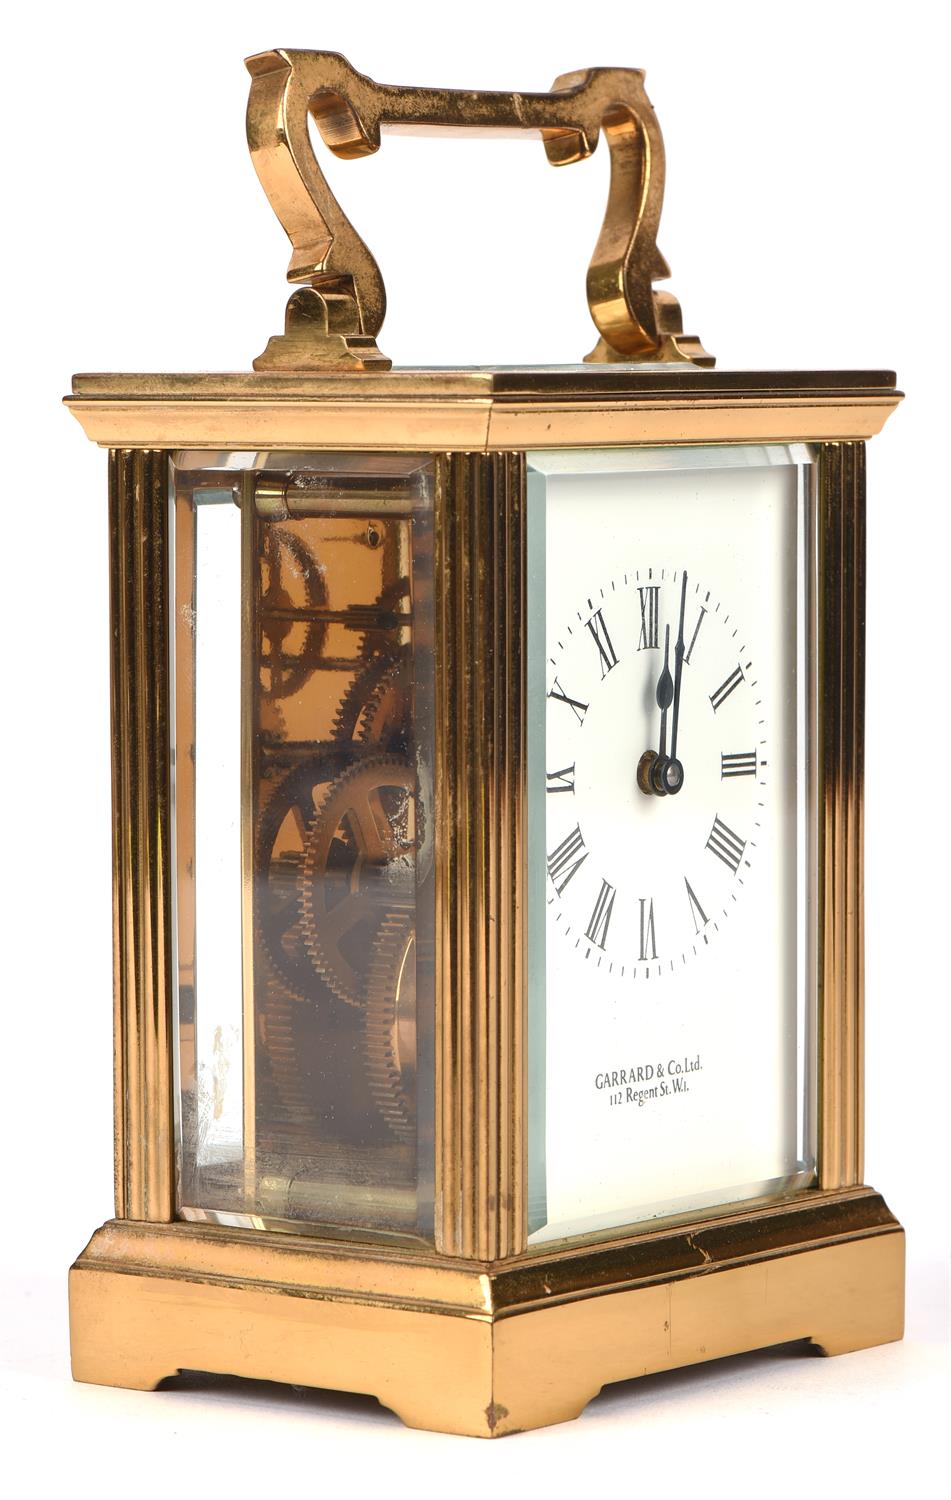 Garrard and Co. Ltd, a brass carriage clock, with white enamel dial, Roman numeral chapter room, - Image 3 of 7